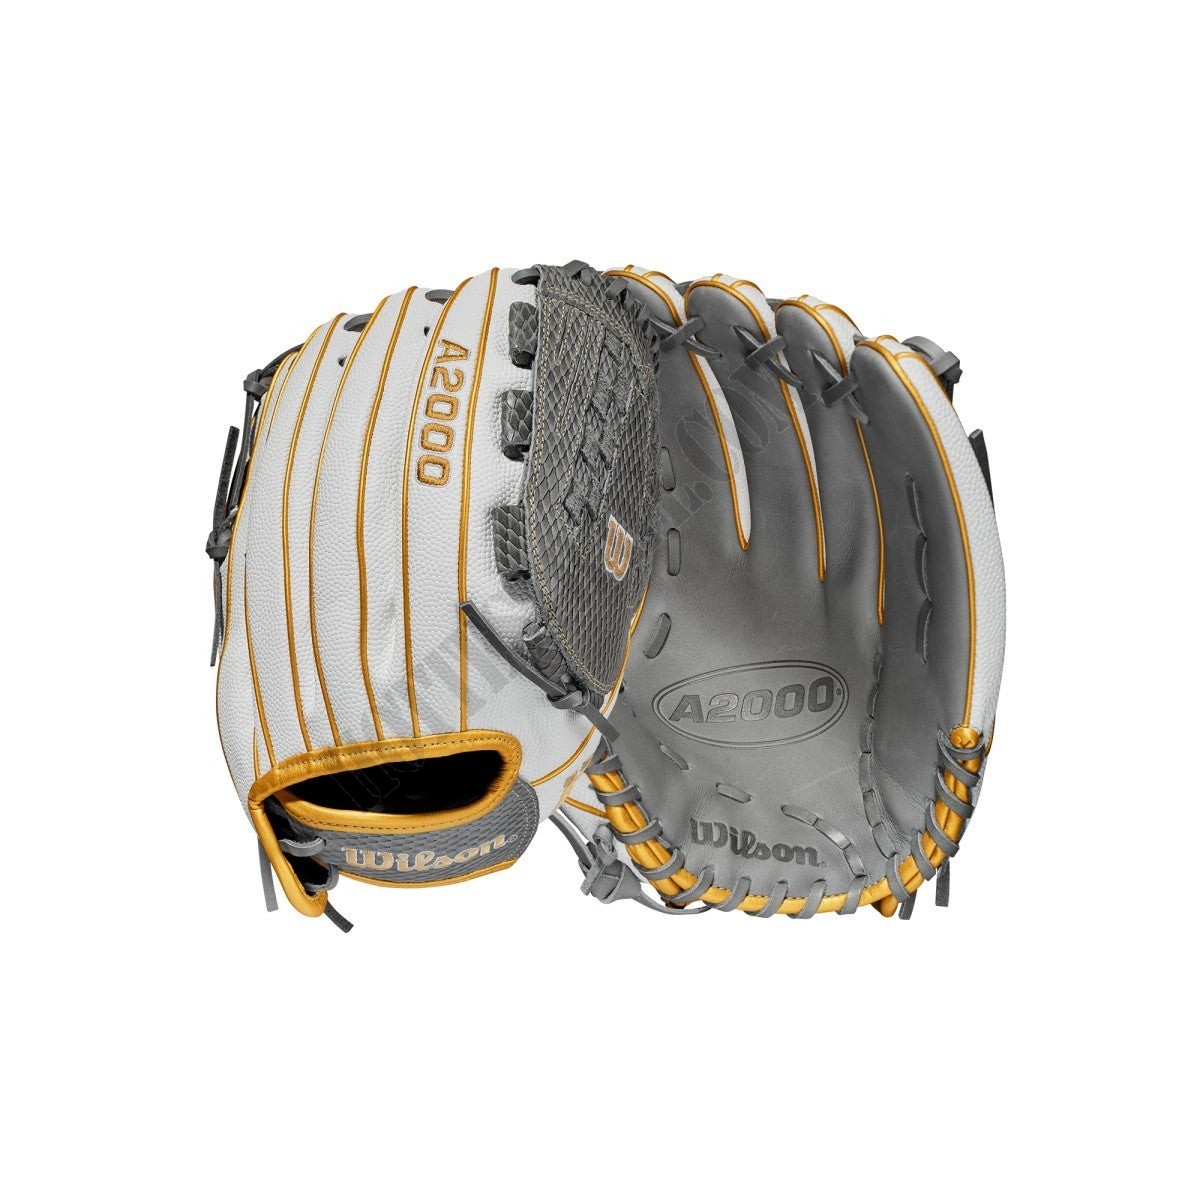 2021 A2000 V125SS 12.5" Outfield Fastpitch Glove ● Wilson Promotions - 2021 A2000 V125SS 12.5" Outfield Fastpitch Glove ● Wilson Promotions